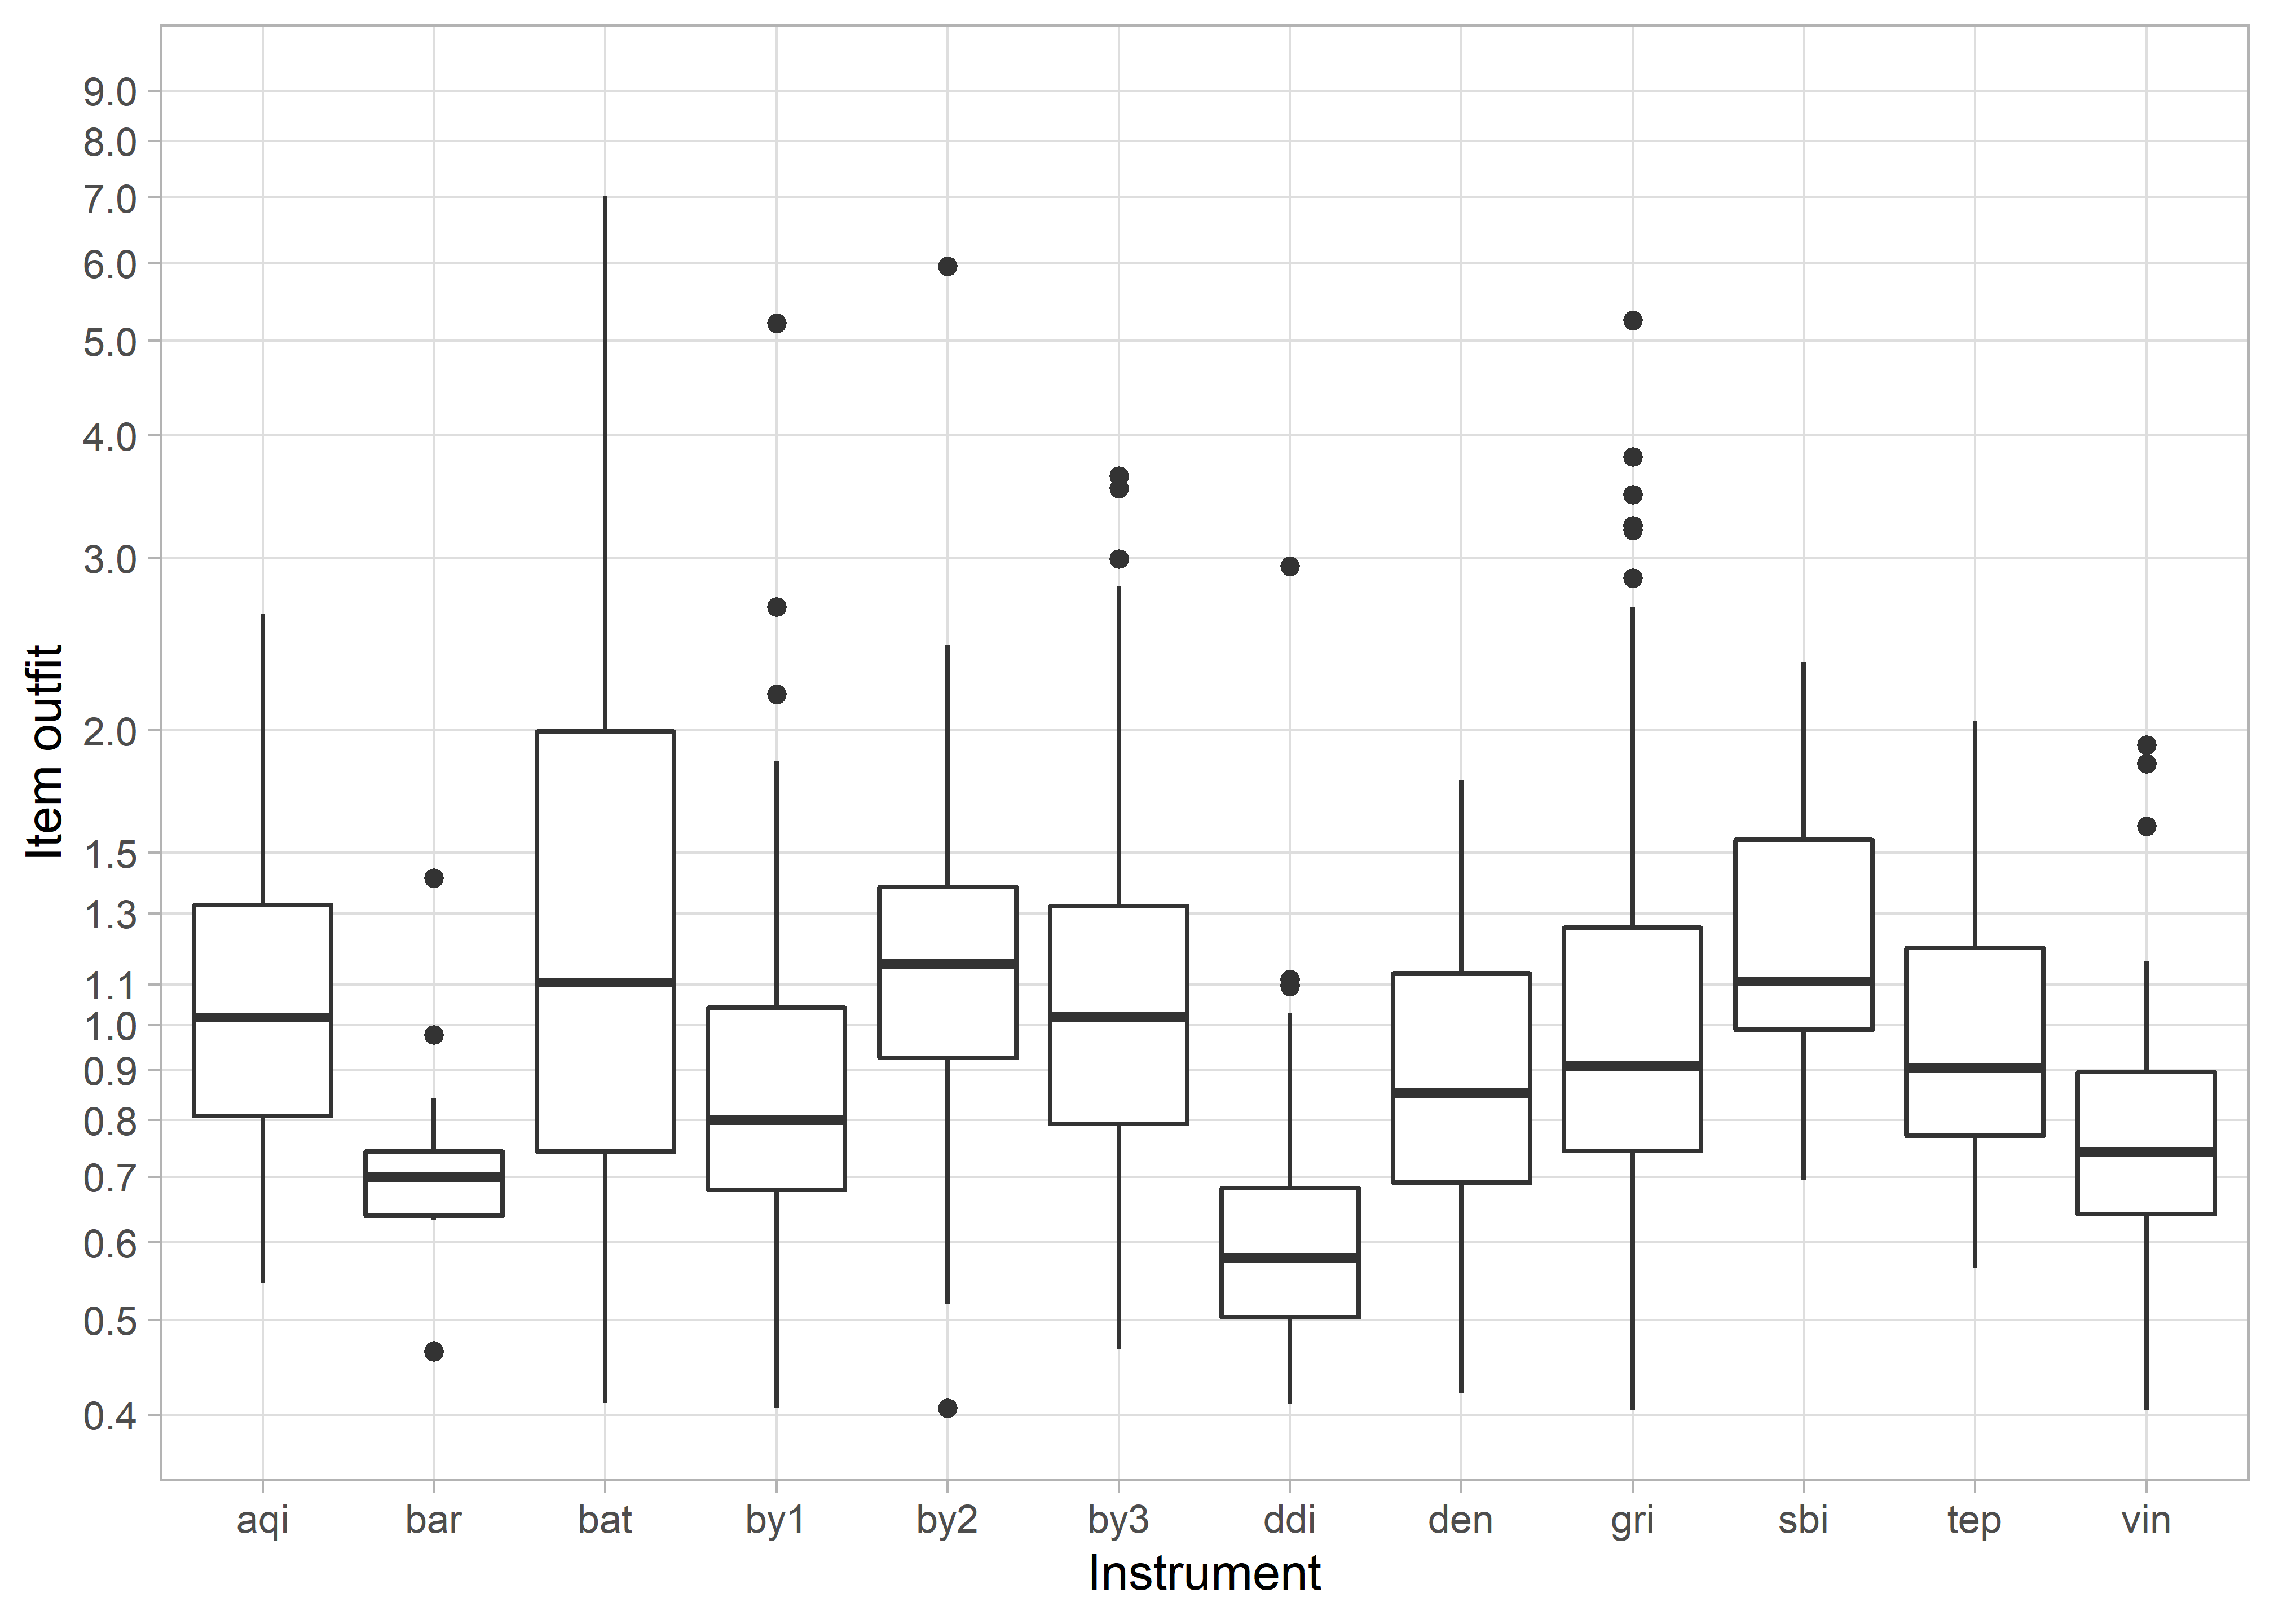 Box plot of the distribution of item outfit per instrument in model 1339_11.